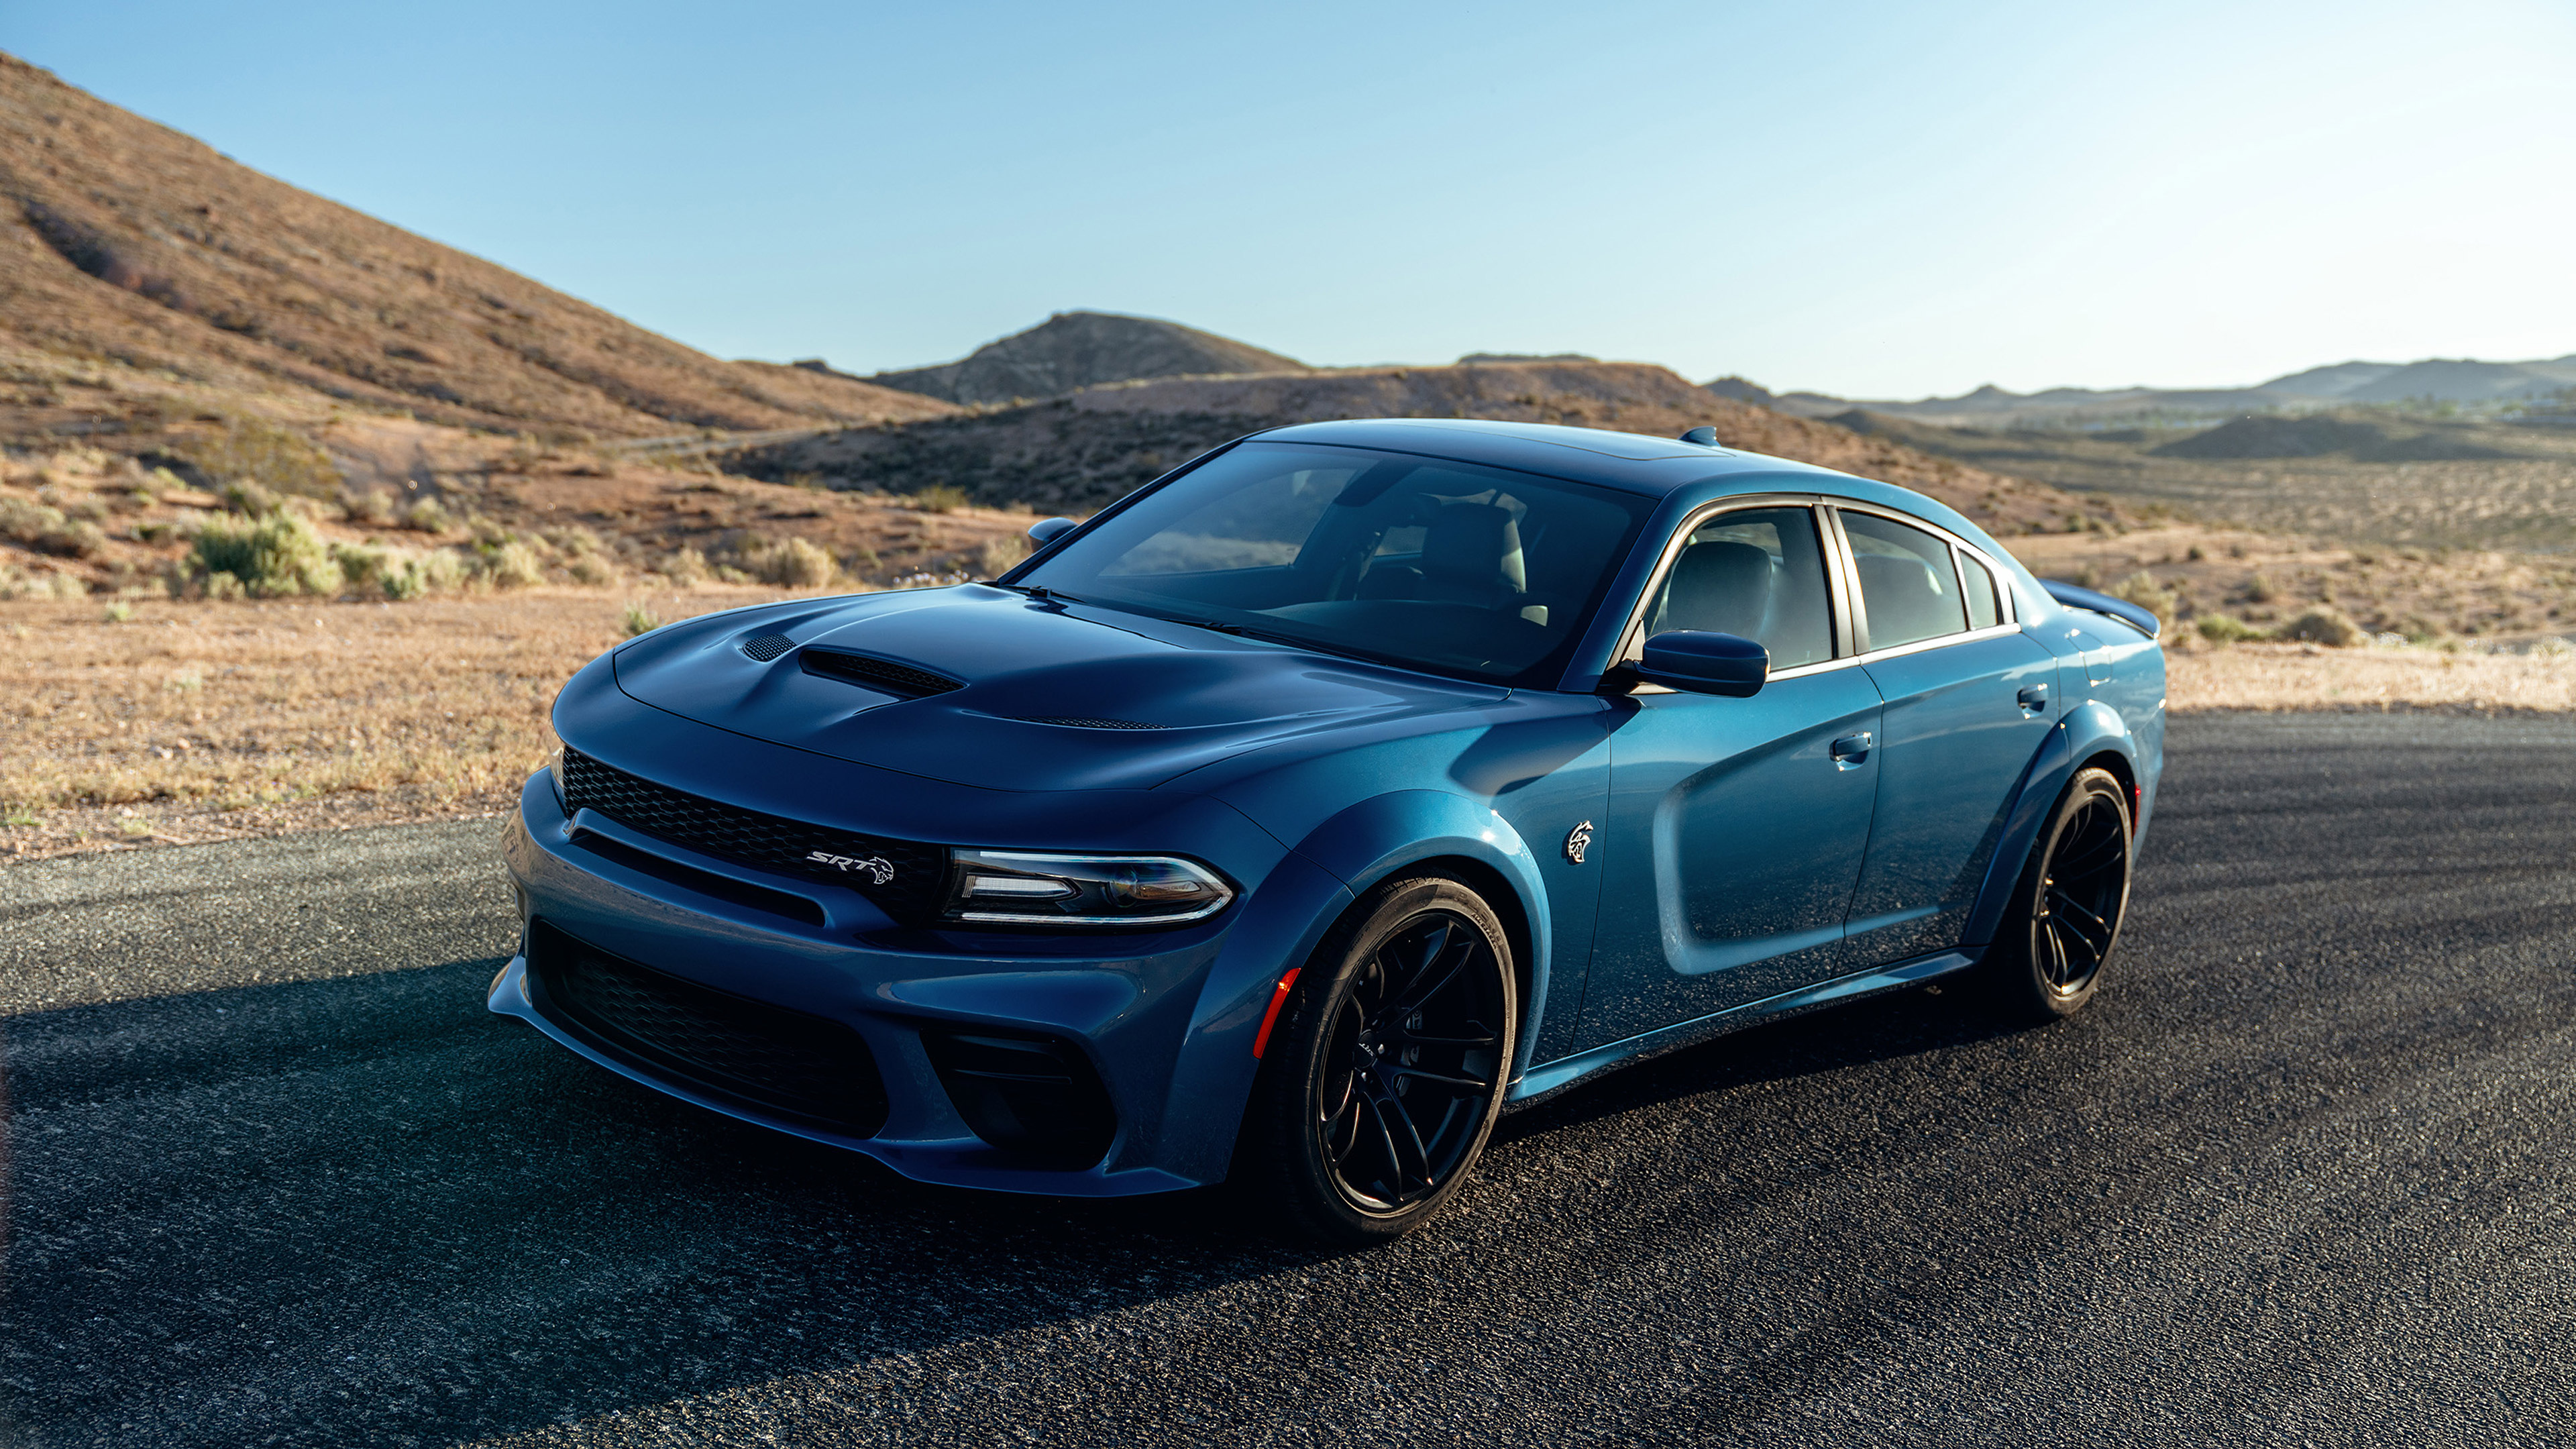 Dodge, Auto industry, Charger wallpapers, High-resolution images, 3840x2160 4K Desktop